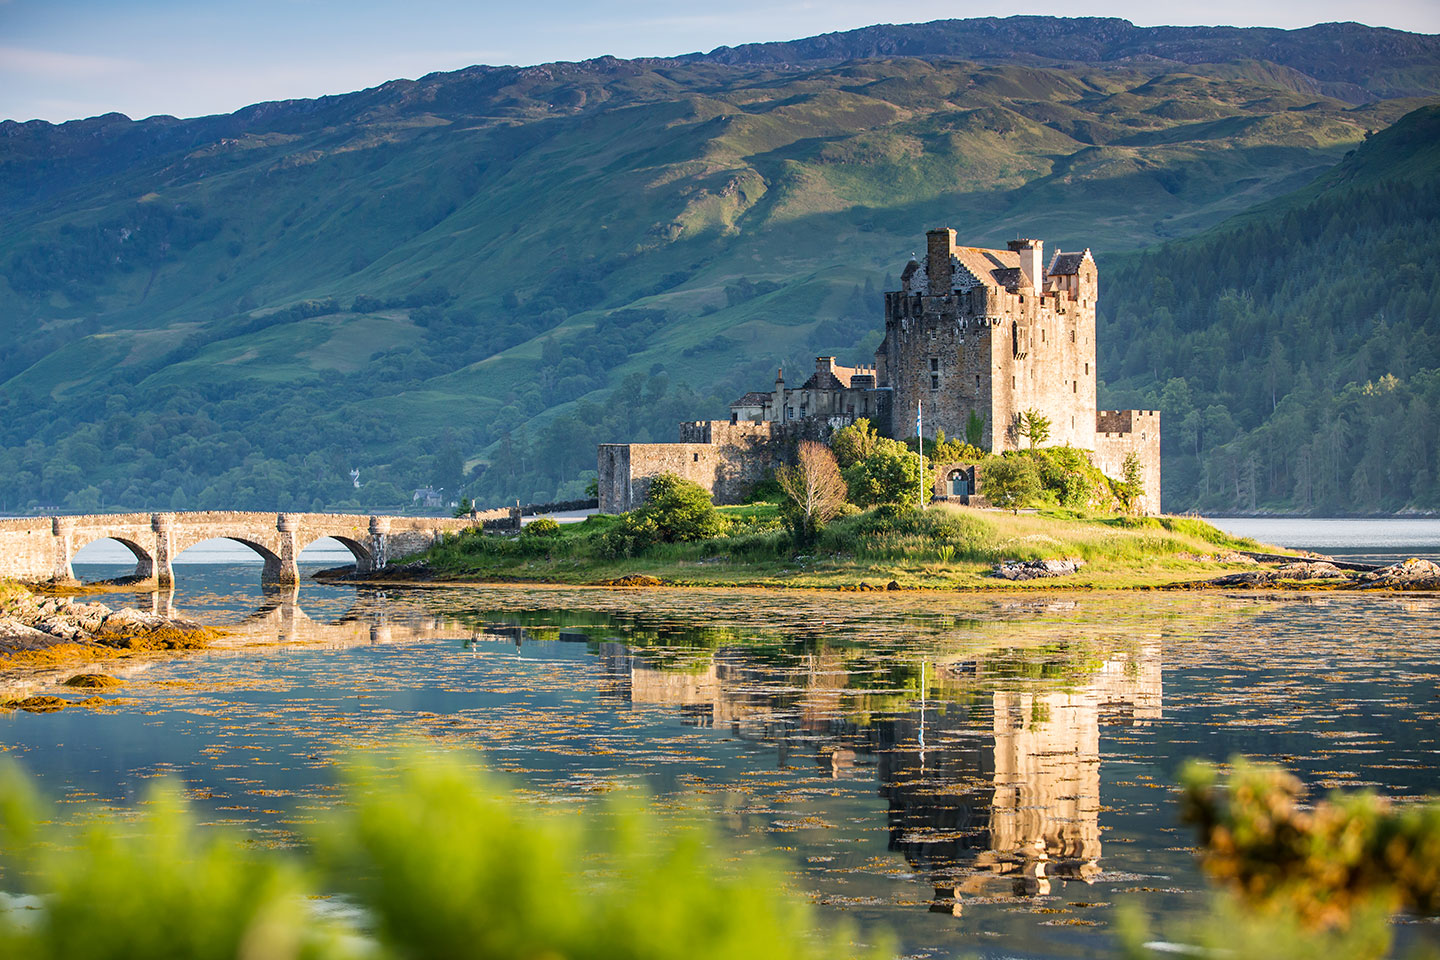 Eilean Donan castle with a reflection in the water, Scotland